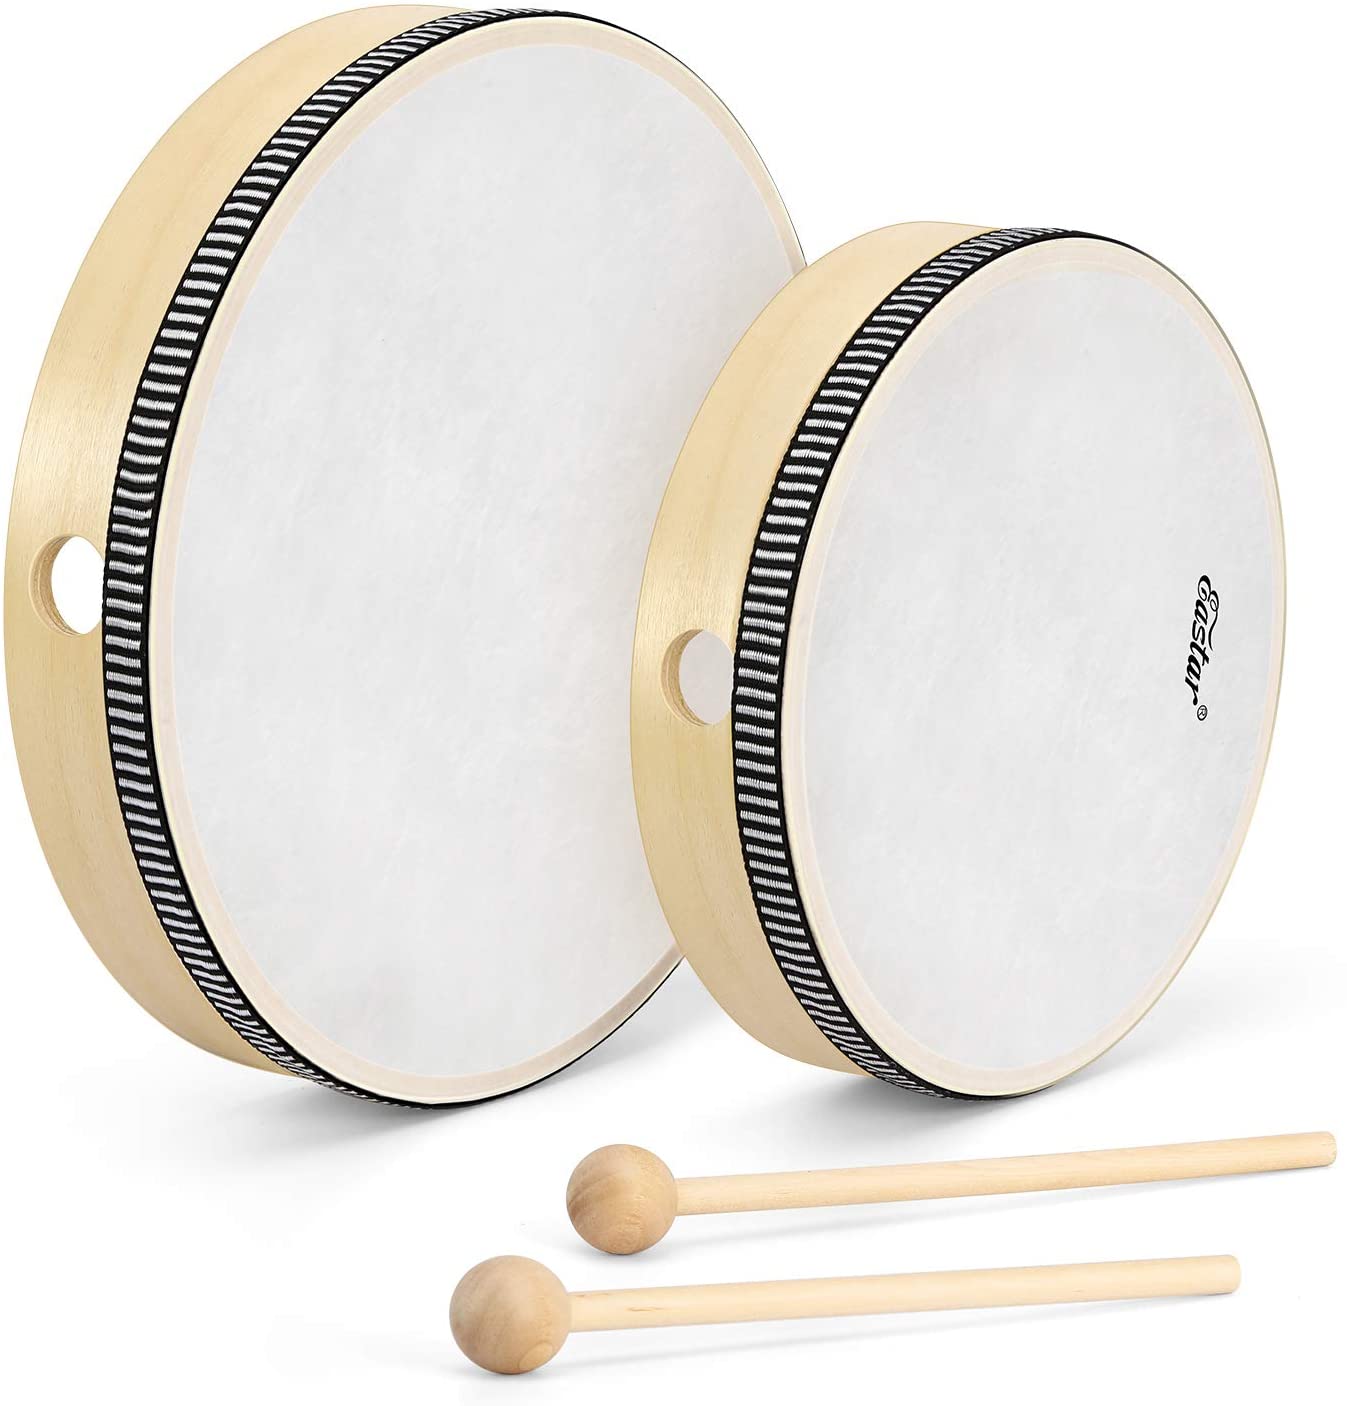 

Eastar Frame Drums Hand Drums 8 inch and 10 inch for Kids/Beginners/Adults Percussion Wood with Drumsticks